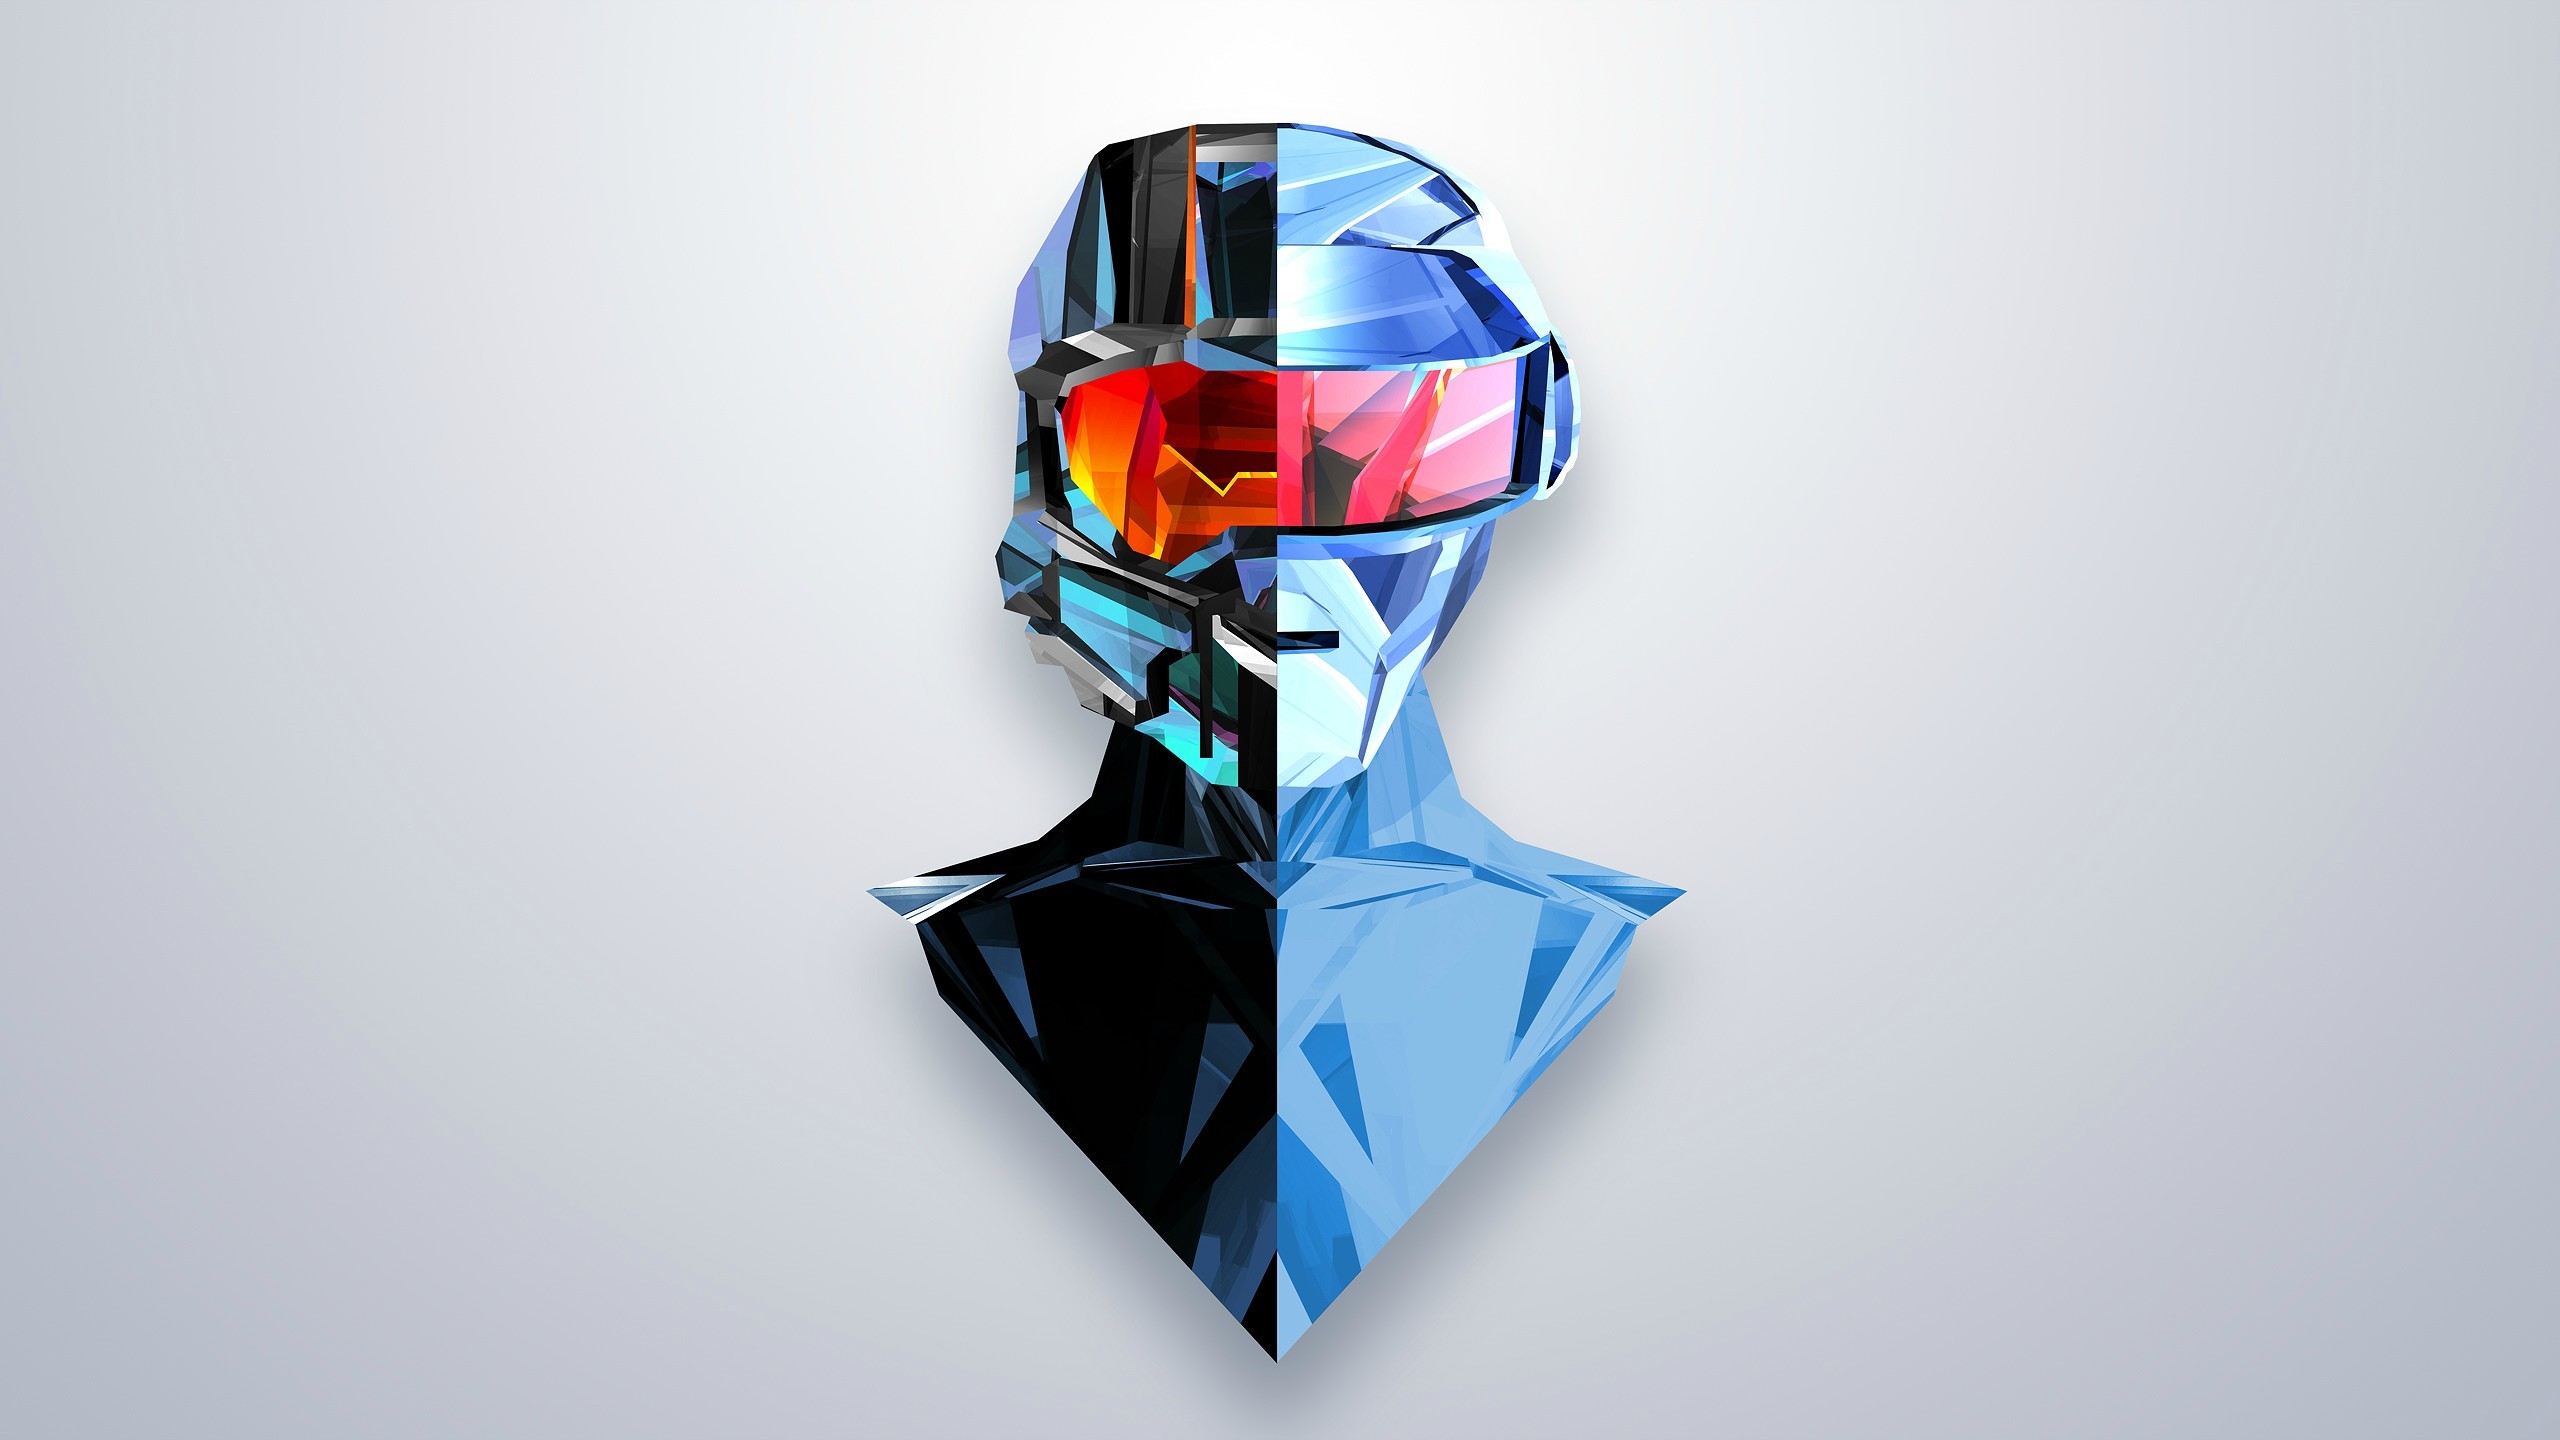 Daft Chief by Justin Maller